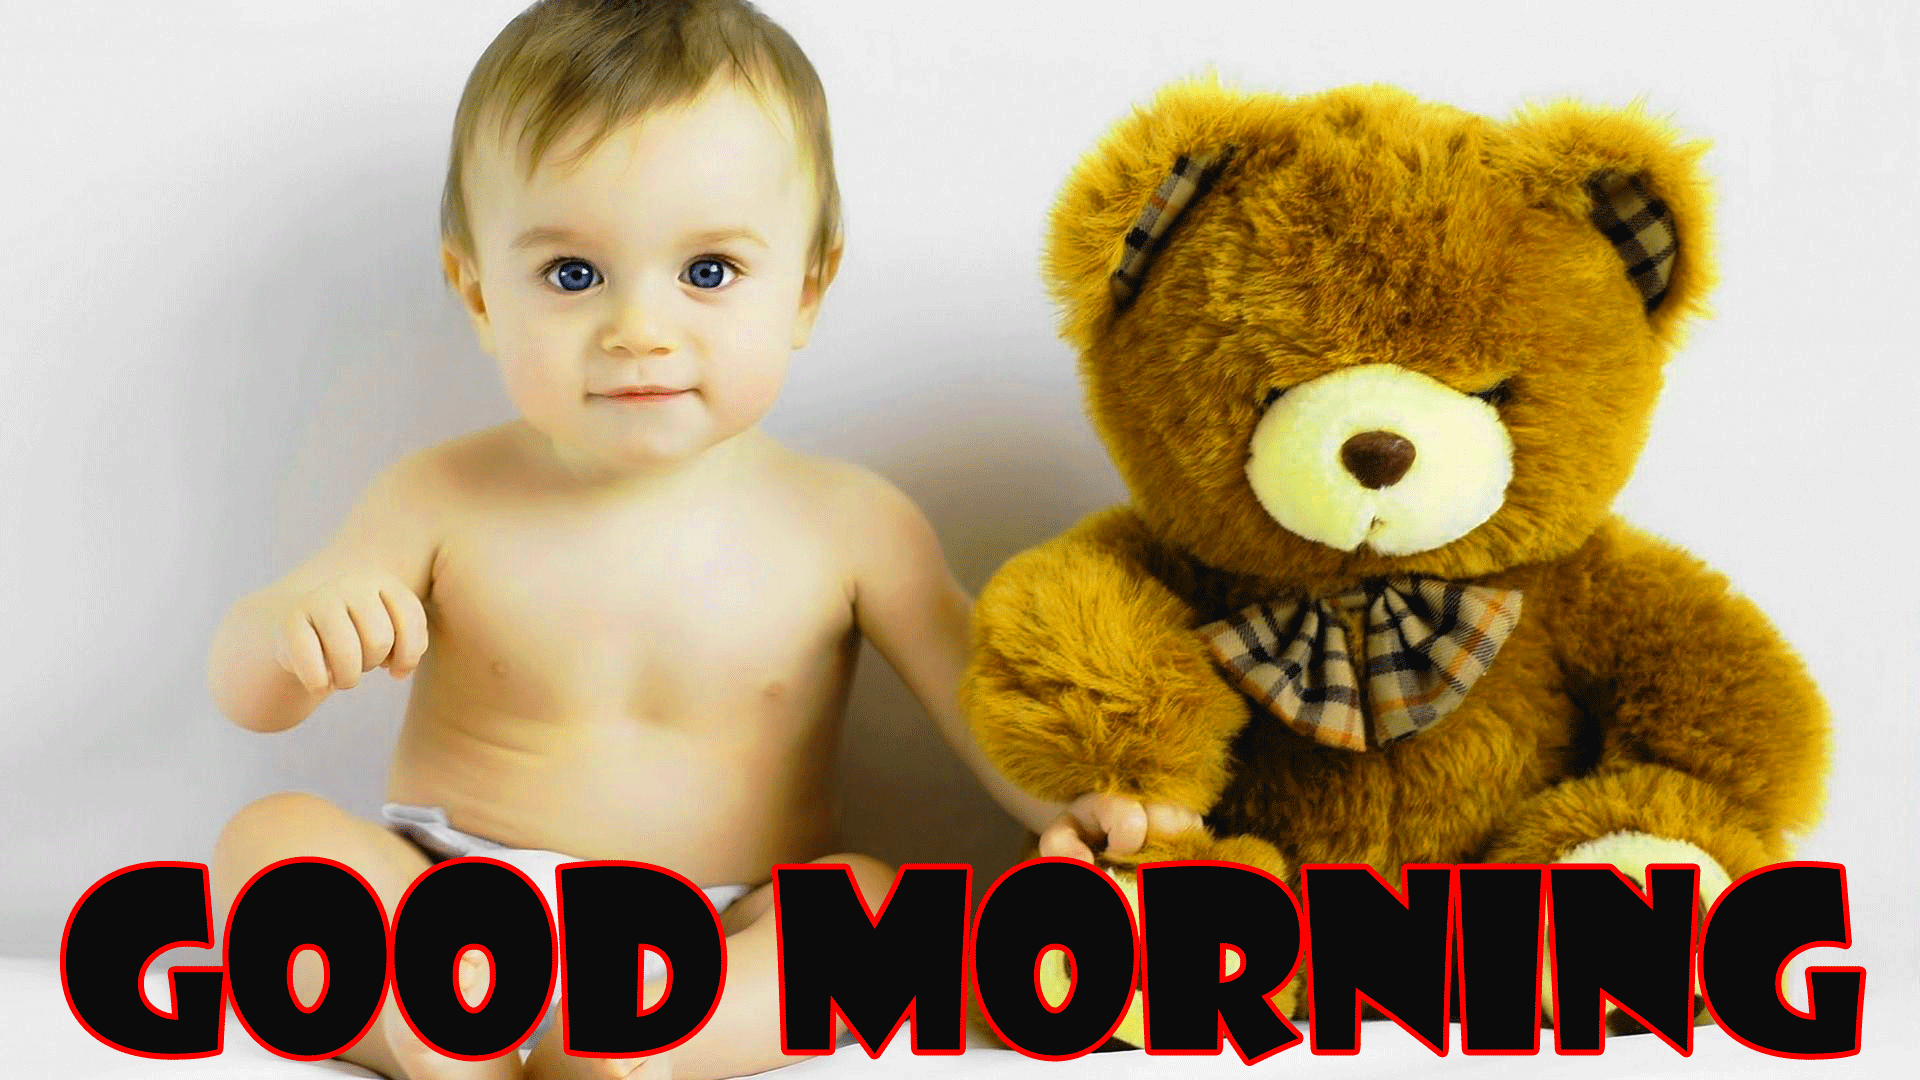 Cute Baby Good Morning Wallpaper Pictures Images Free - Children Image Download , HD Wallpaper & Backgrounds